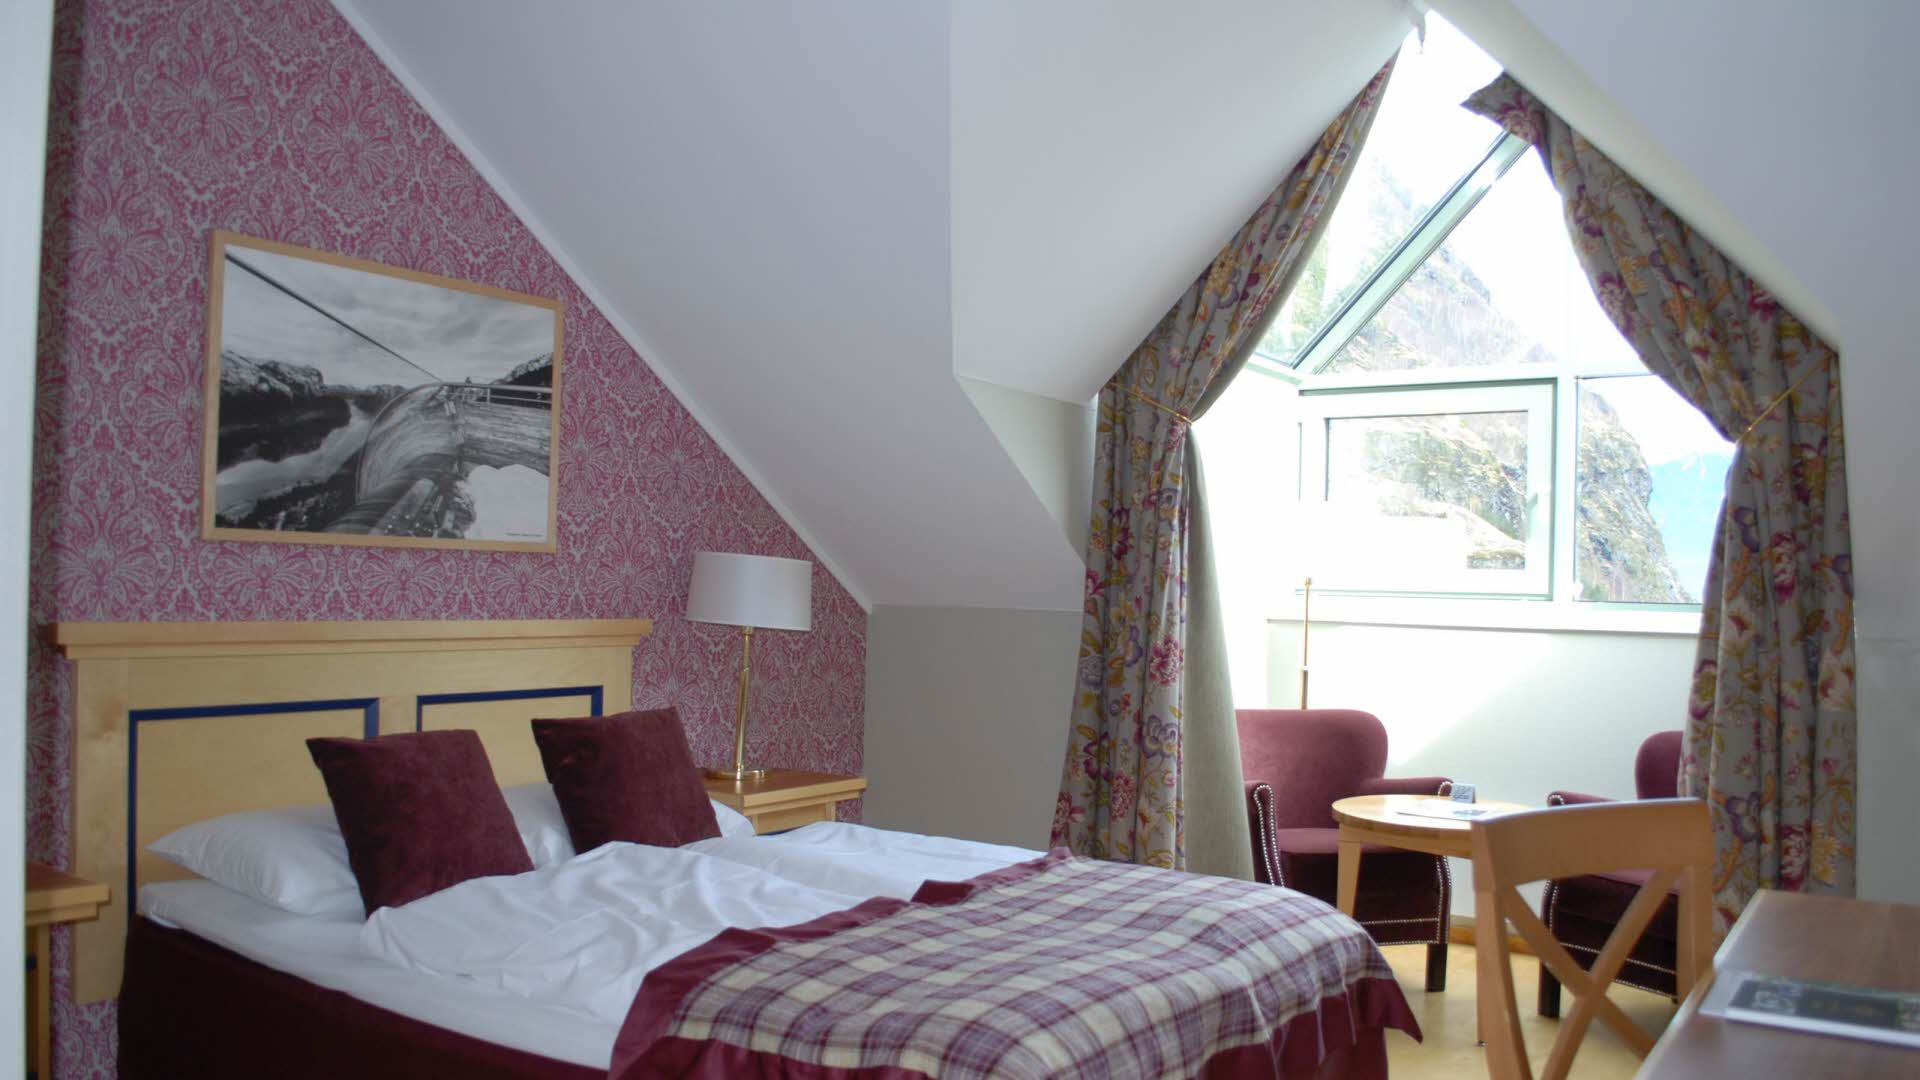 Single room at Fretheim Hotel made up for two people, with queen size bed in front and seating area in bay window in the back. 